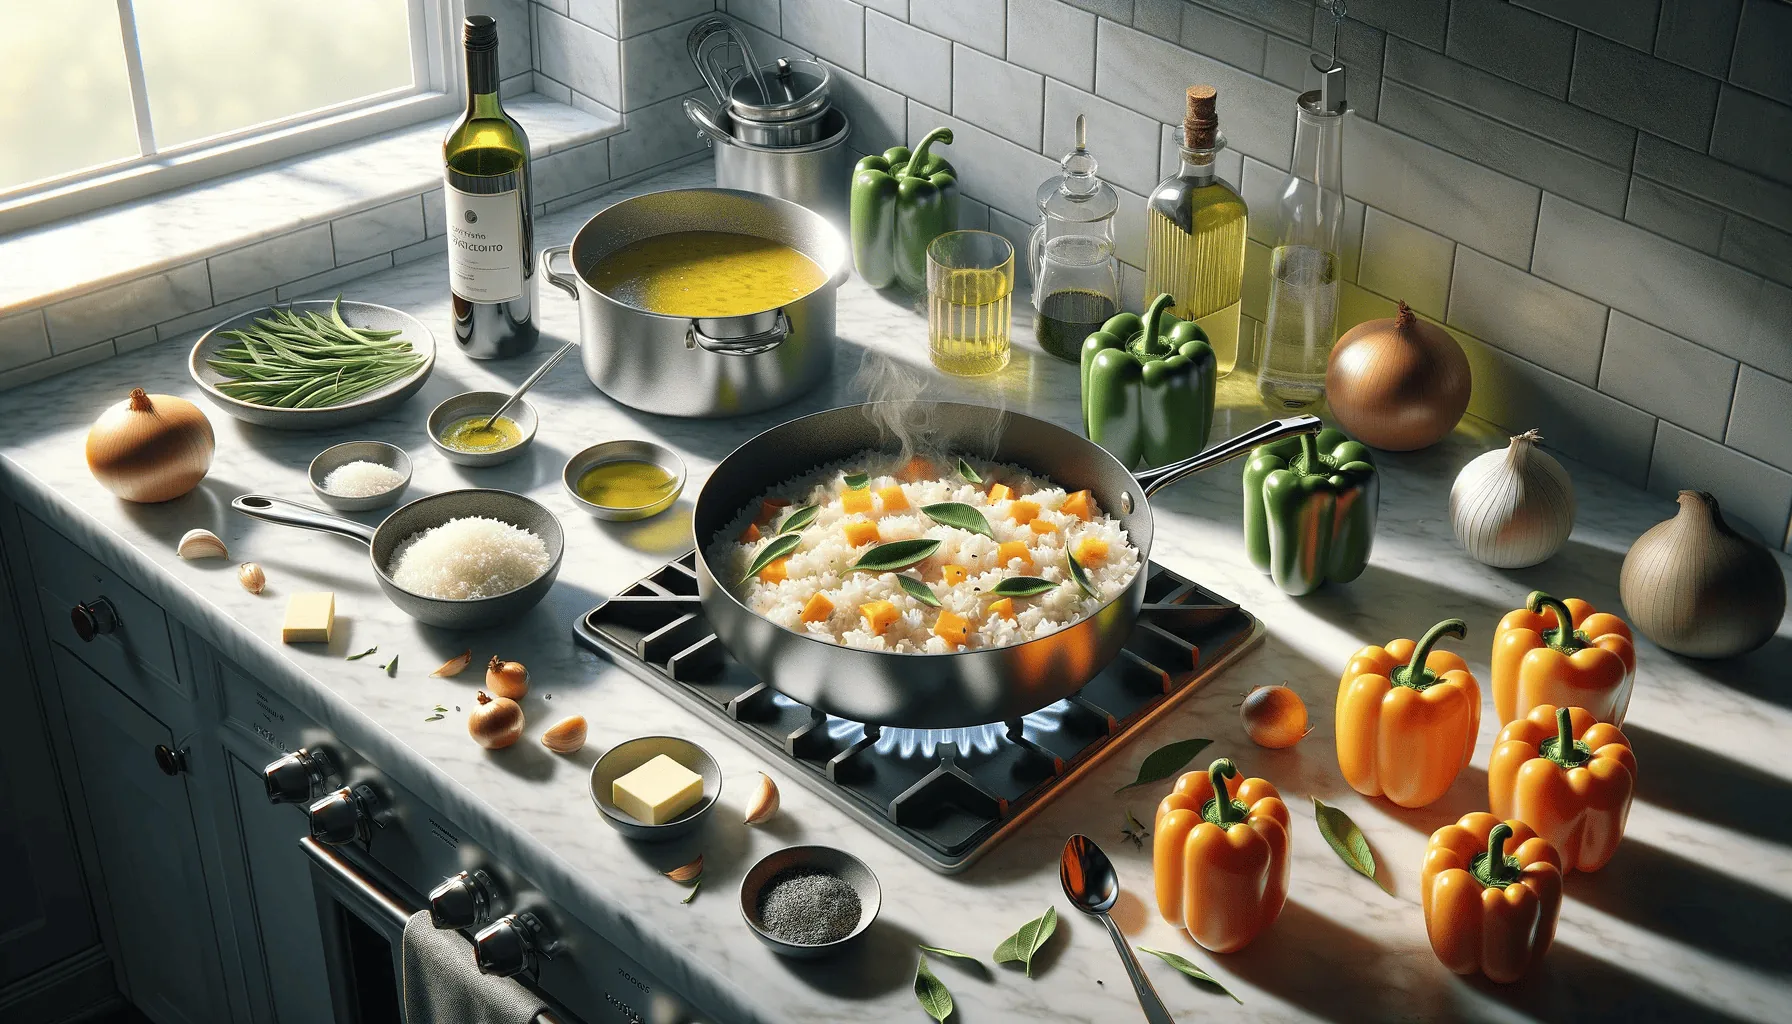 Mid-cooking process, showing a simmering pan with risotto on a stove, next to a pot of warm broth and a bowl of pumpkin puree, amidst the steam and sizzle of active cooking, with bell peppers prepped on the side.